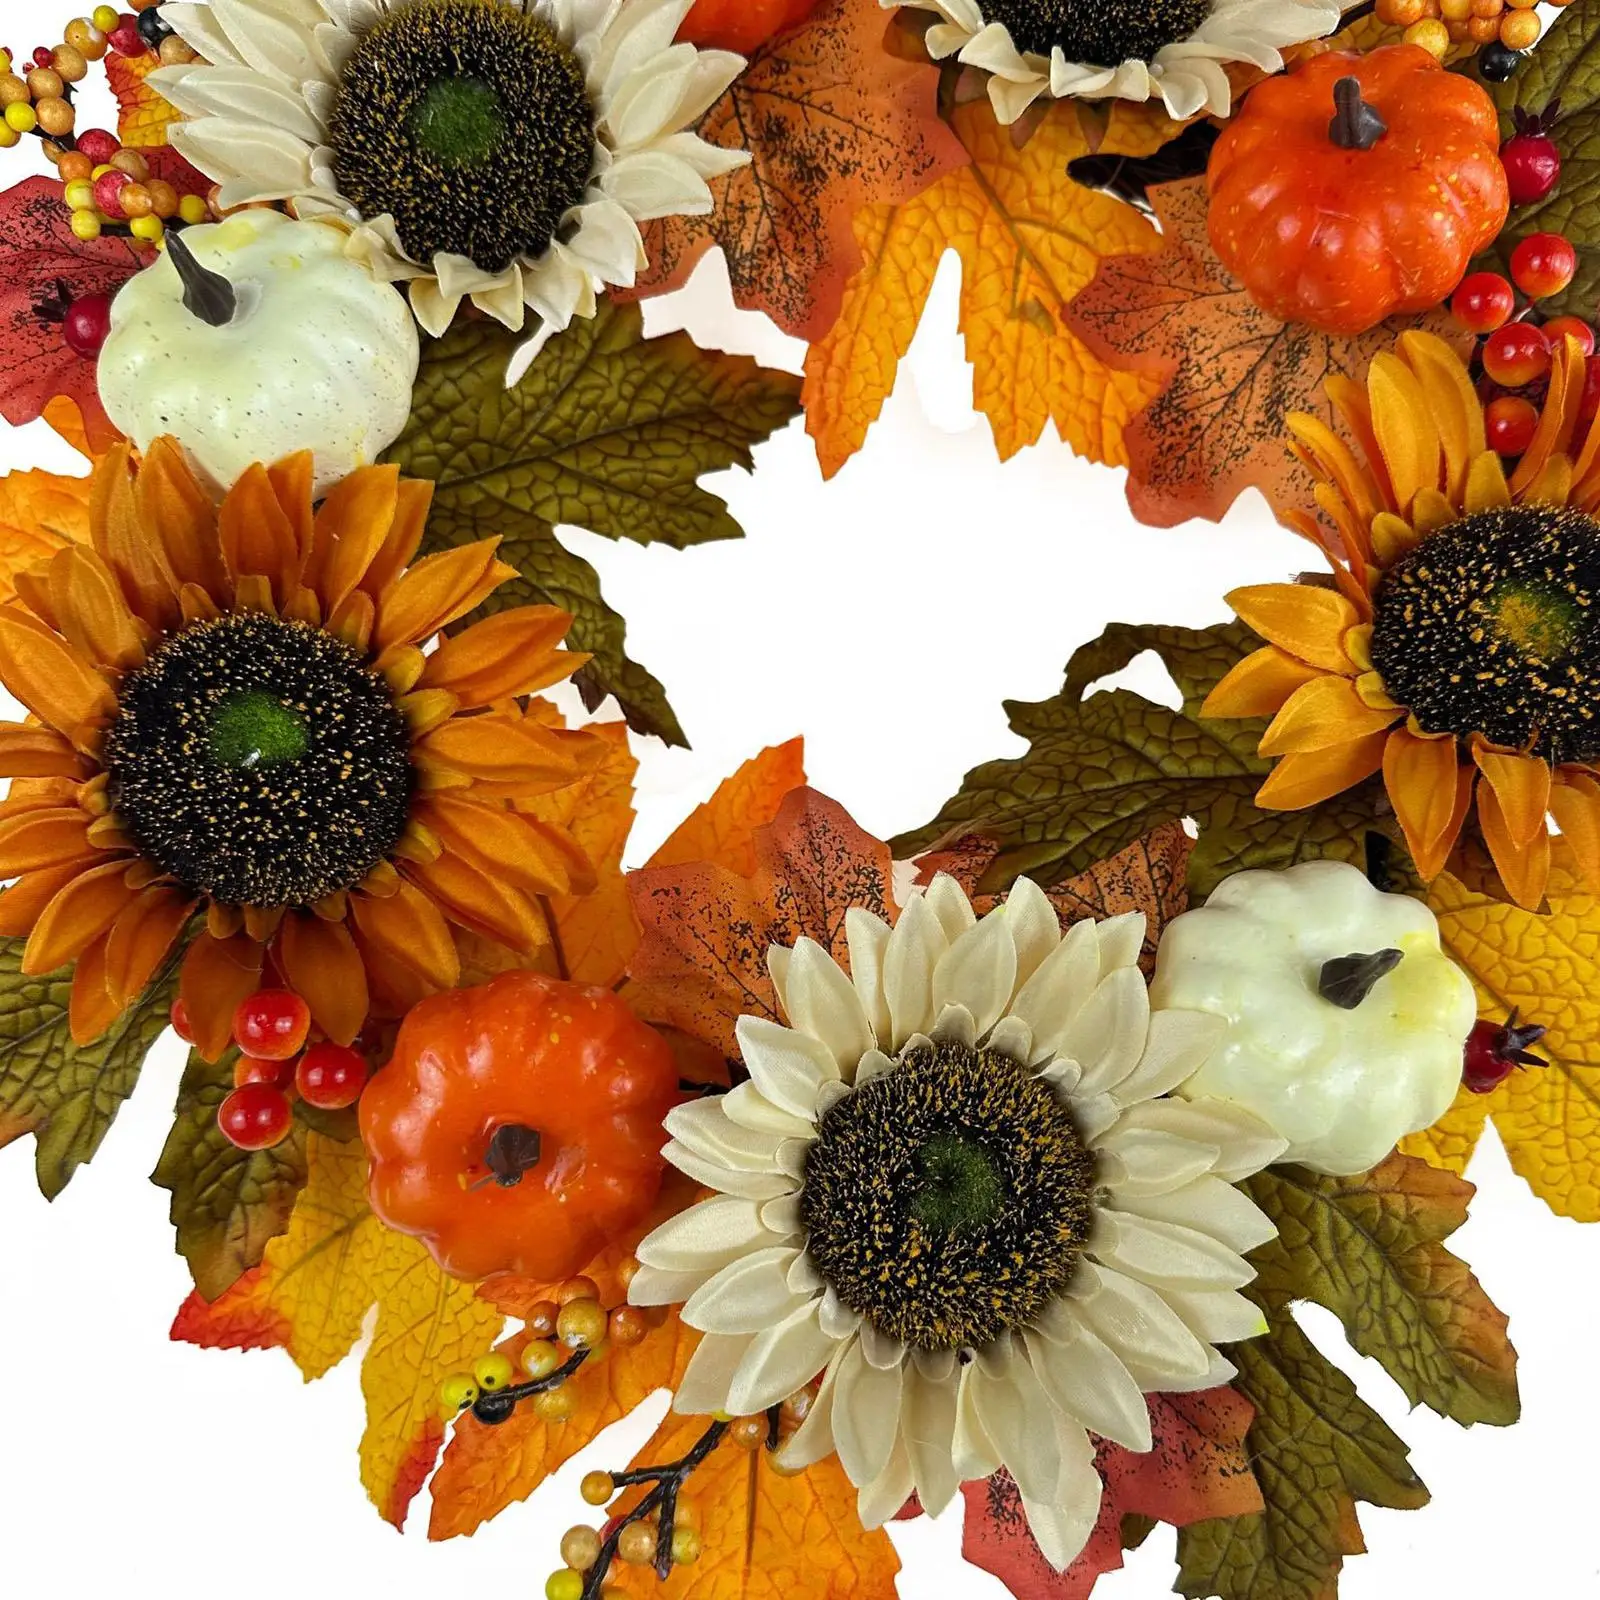 Farmhouse Garland Harvest Decorative 17 inch Fall Decor Wreath for Fireplace Indoor Outdoor Housewarming Thanksgiving